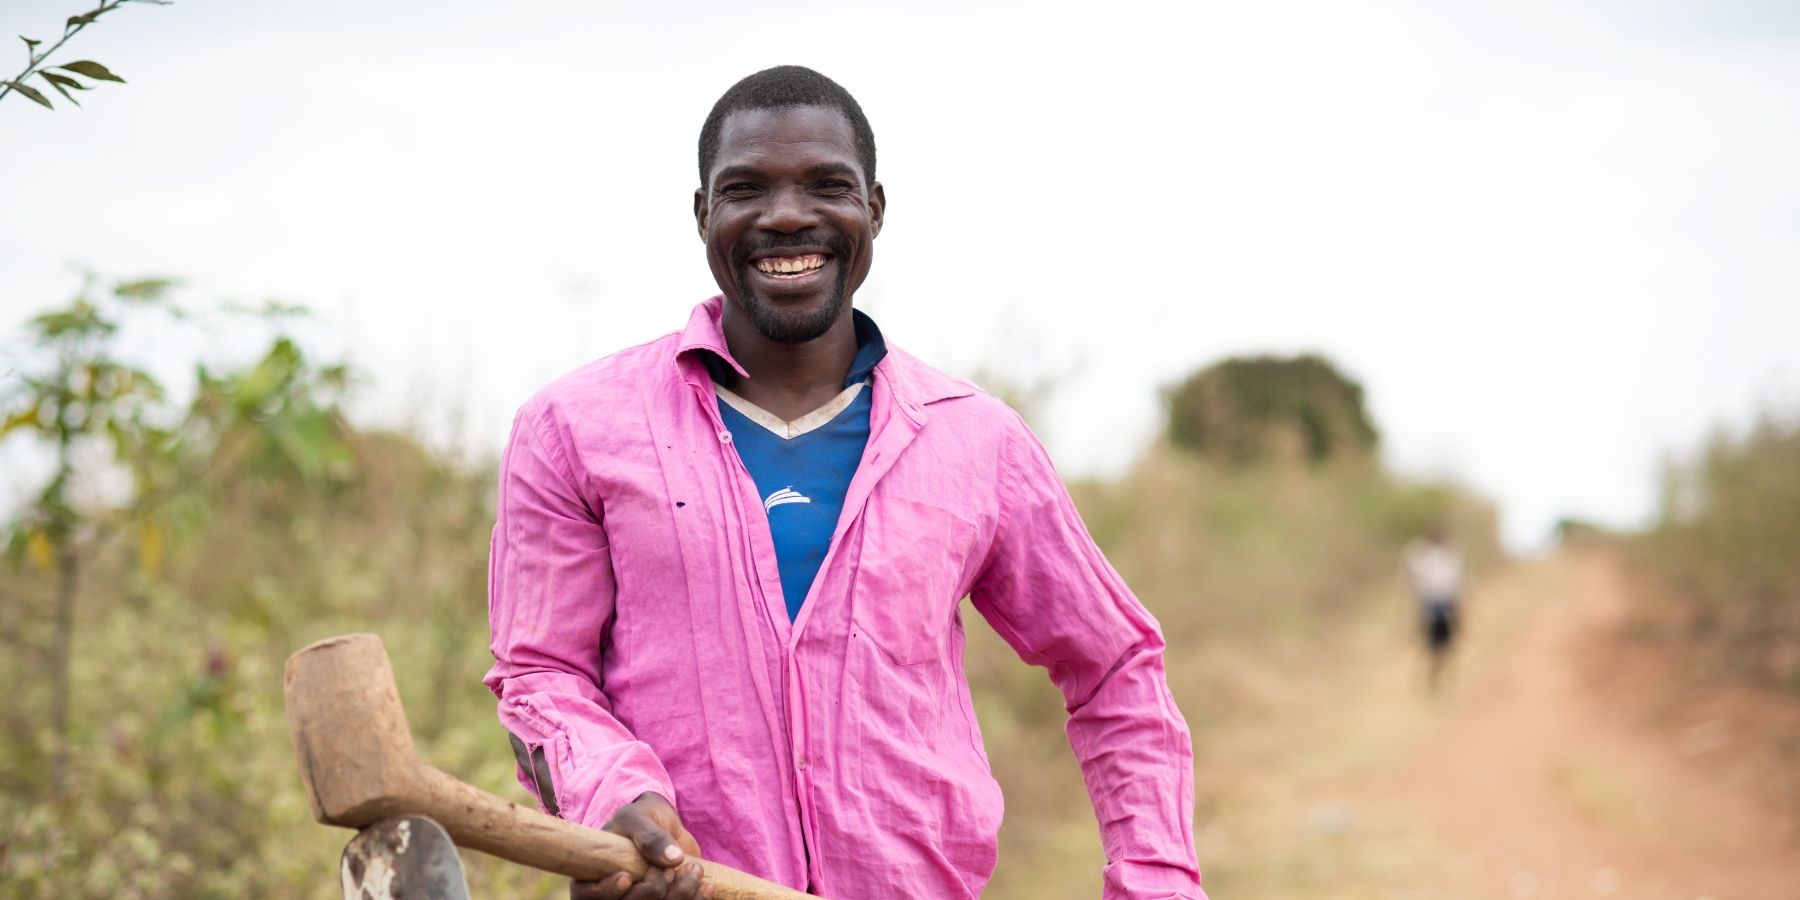 Handson John, a farmer in Malawi smiles at the camera as he holds his jembe